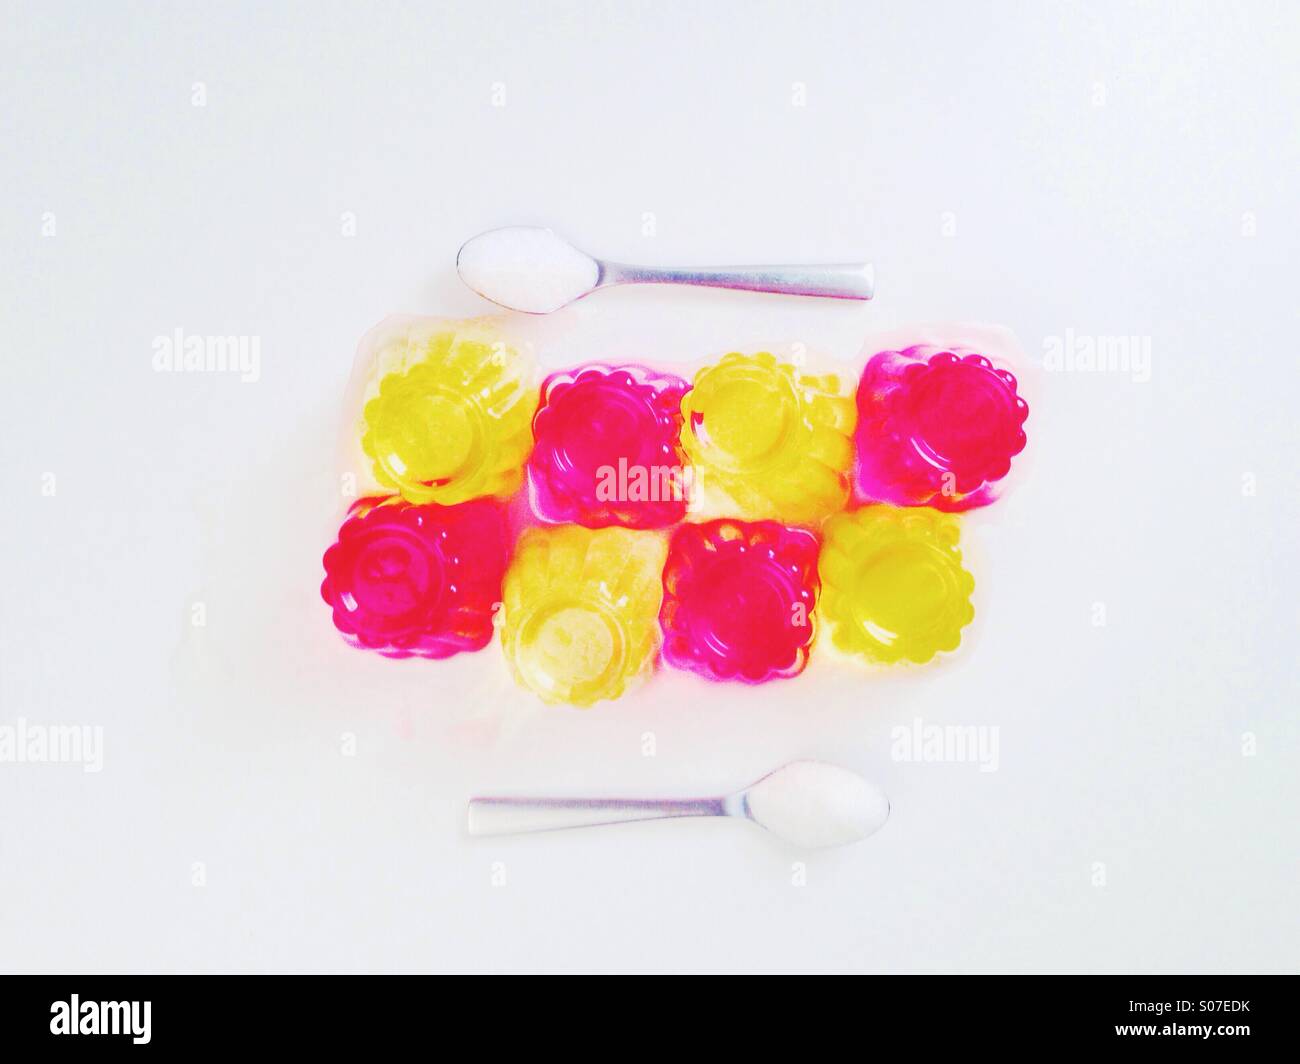 Lemon and strawberry jelly on a white table. Stock Photo